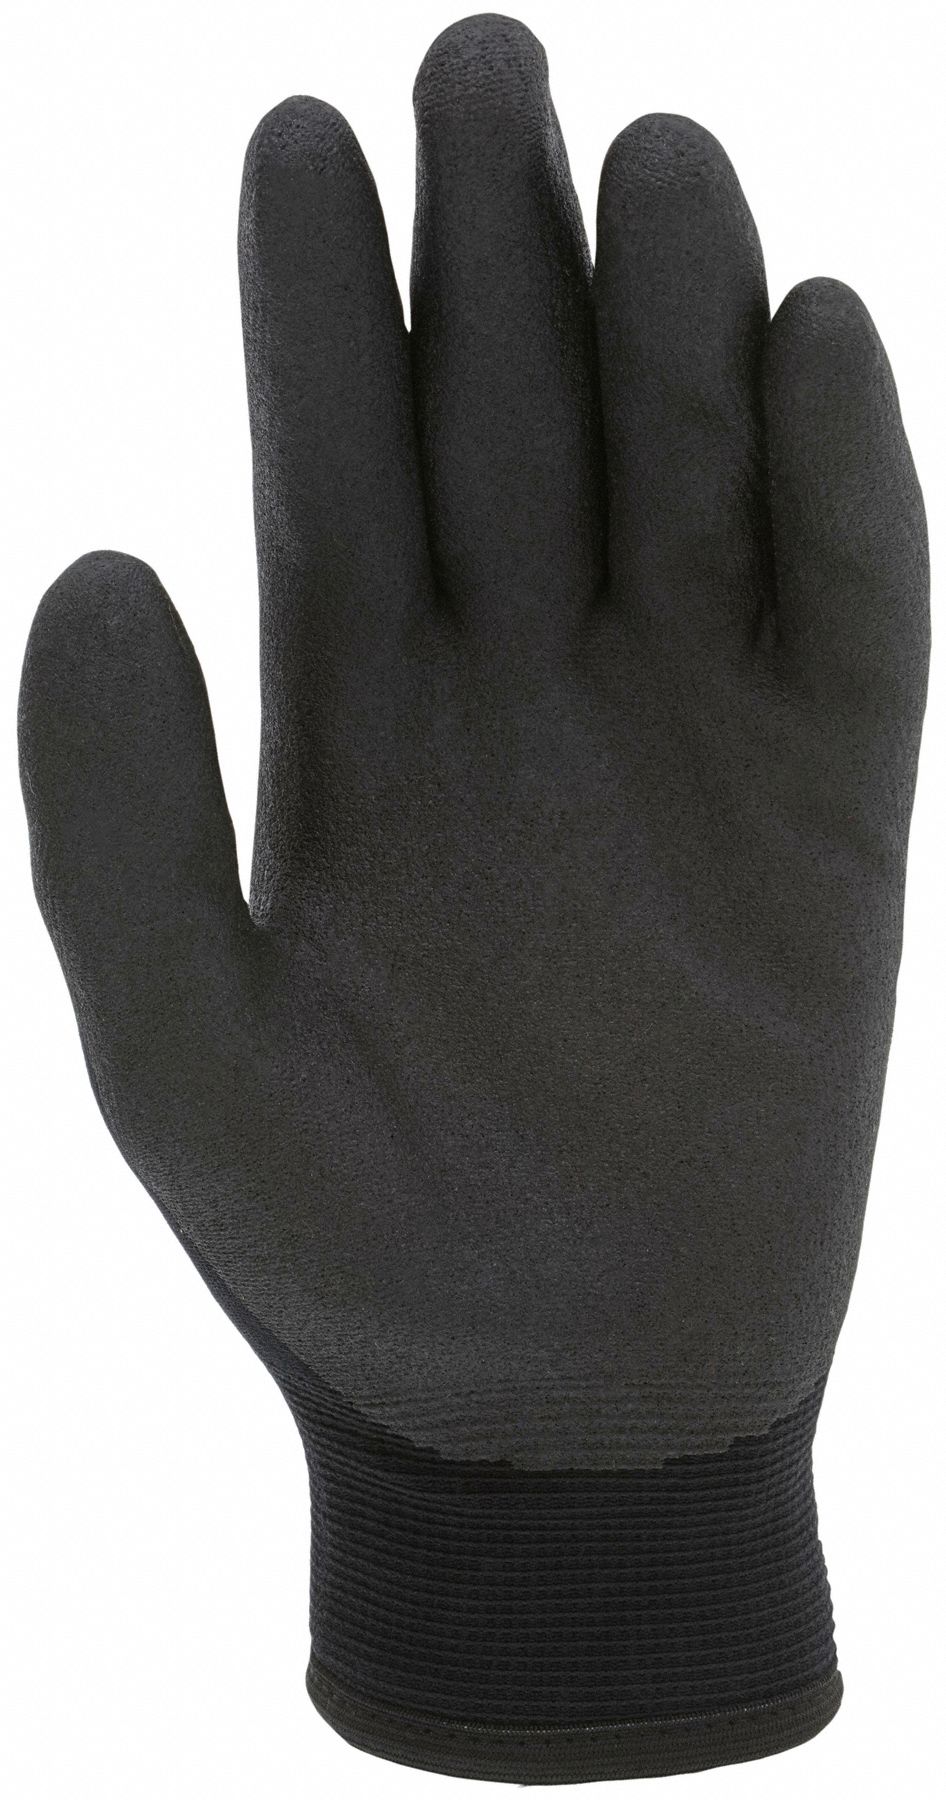 N96790L Gray/Black MCR SAFETY Coated Gloves,Palm and Fingers,L,10",PR 